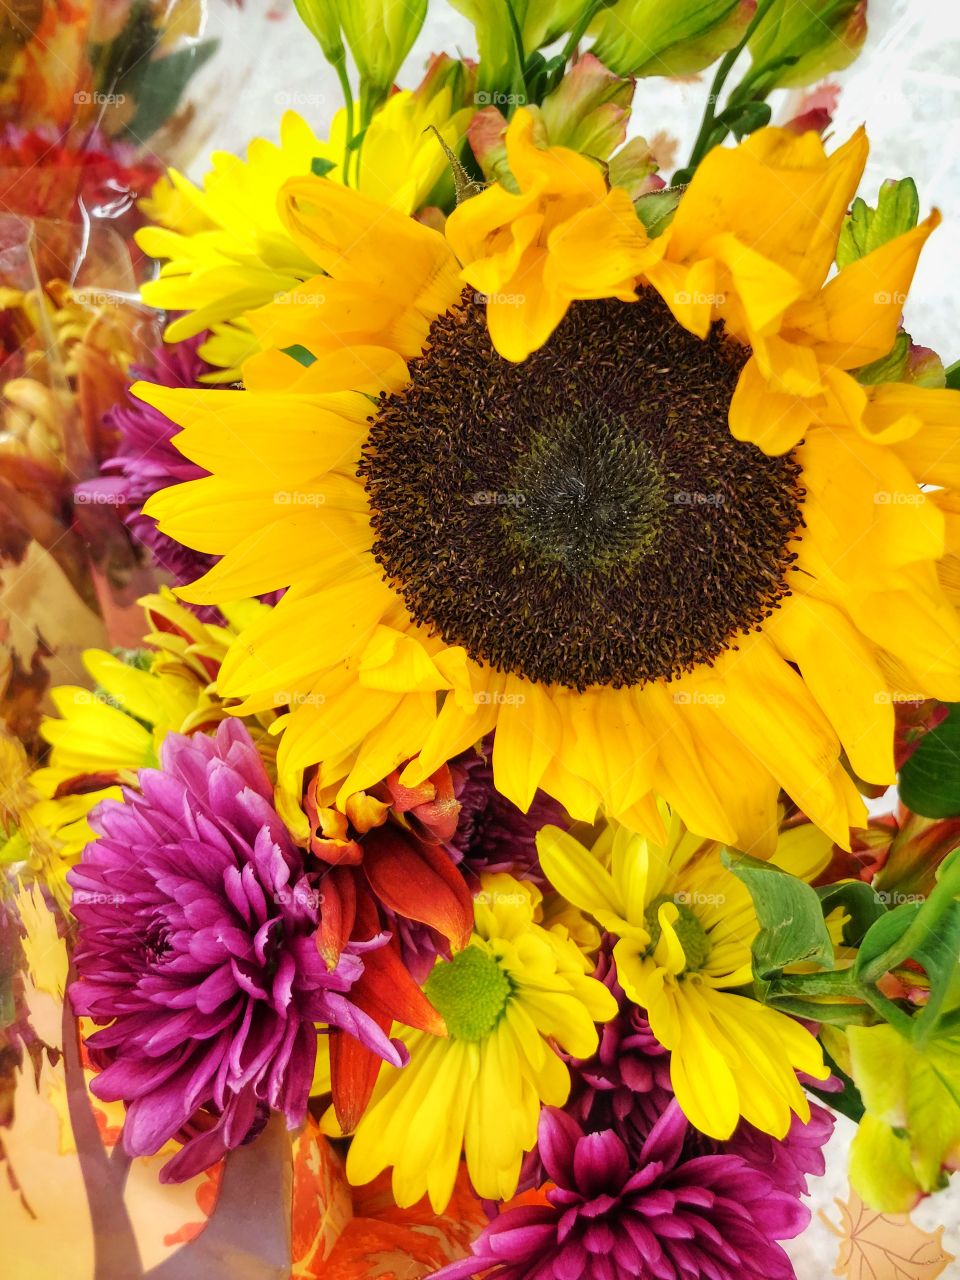 Colorful Fall flowers are nice on a snowy winter day even at a grocery store.   